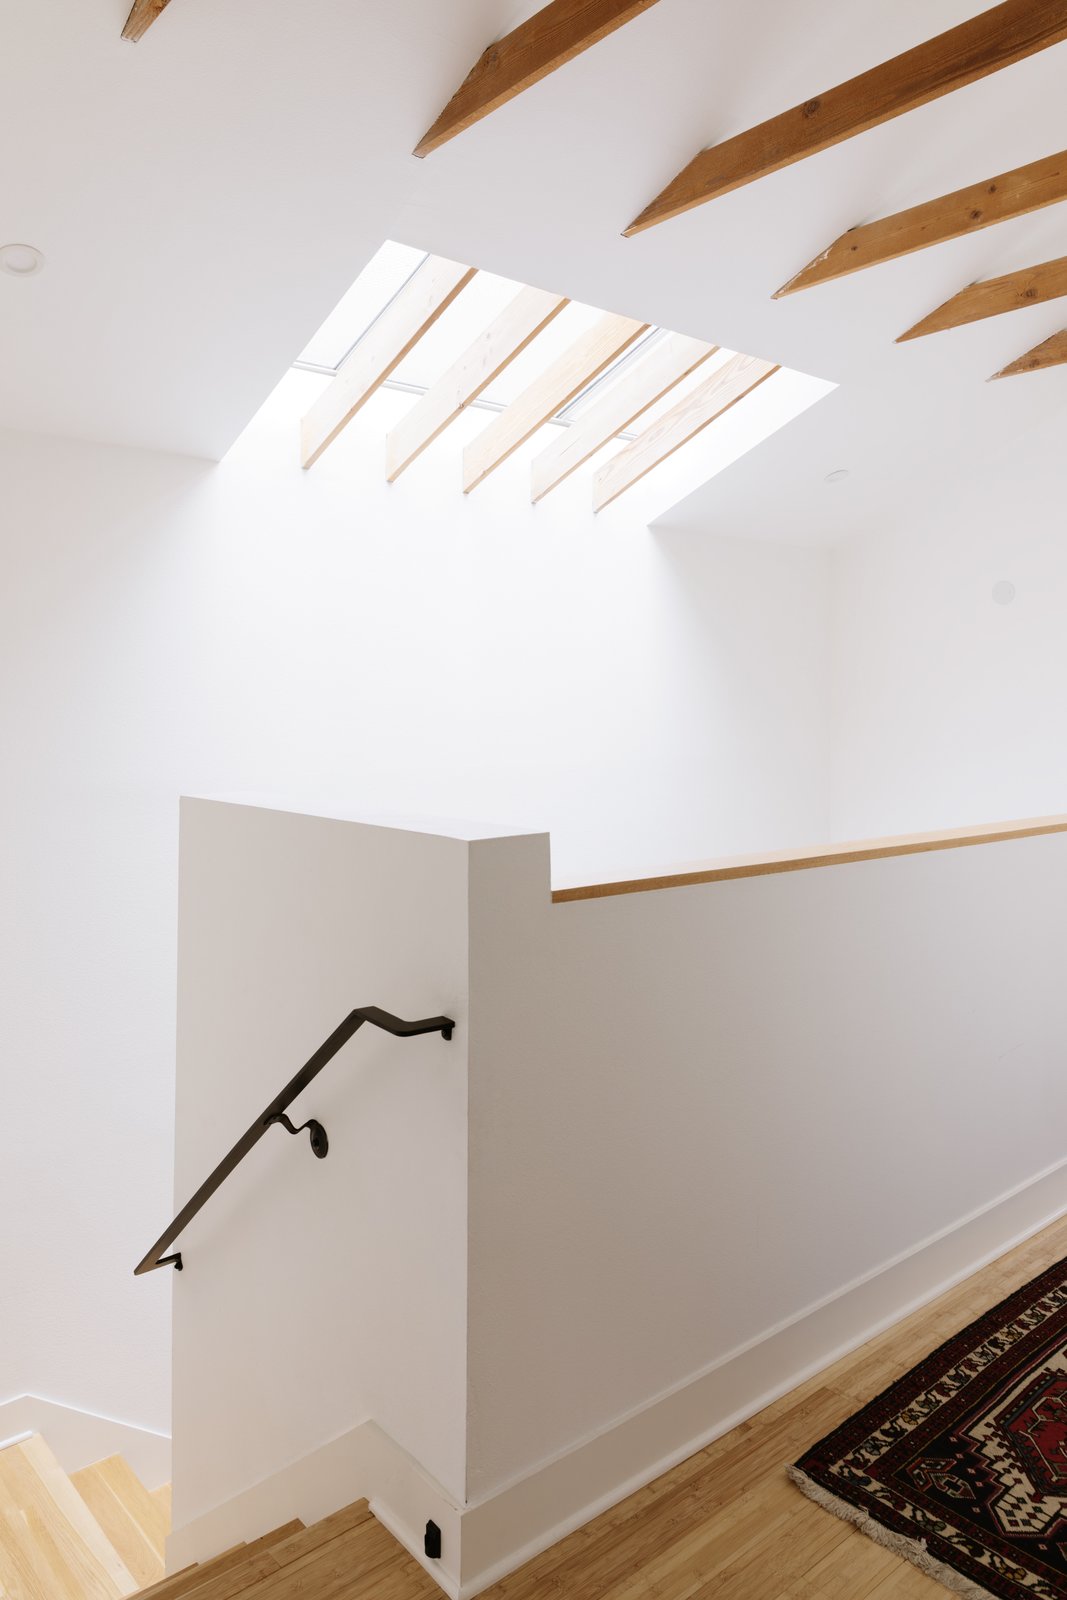 the stairs and landing are warmed by a skylight which directs light throughout different levels of the home